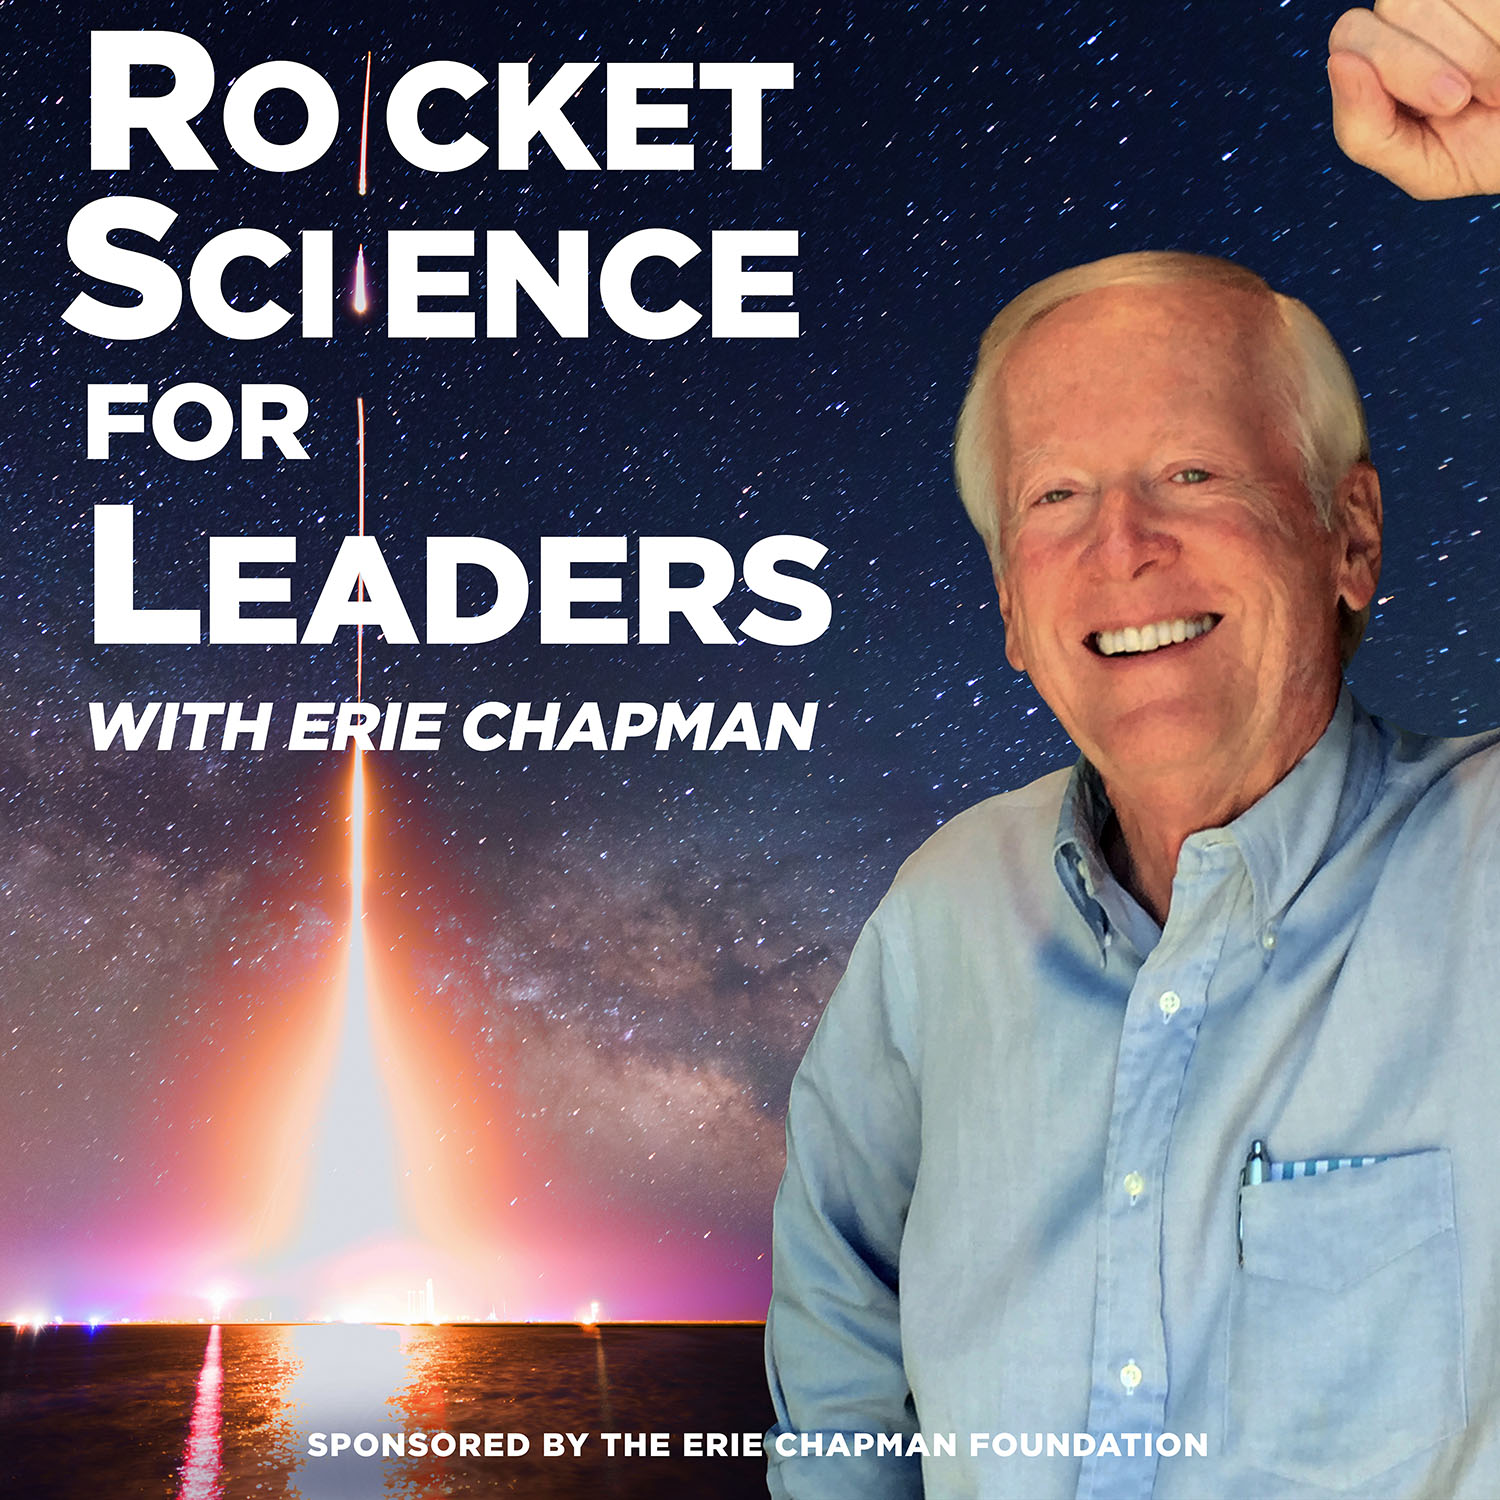 Rocket Science For Leaders with Erie Chapman